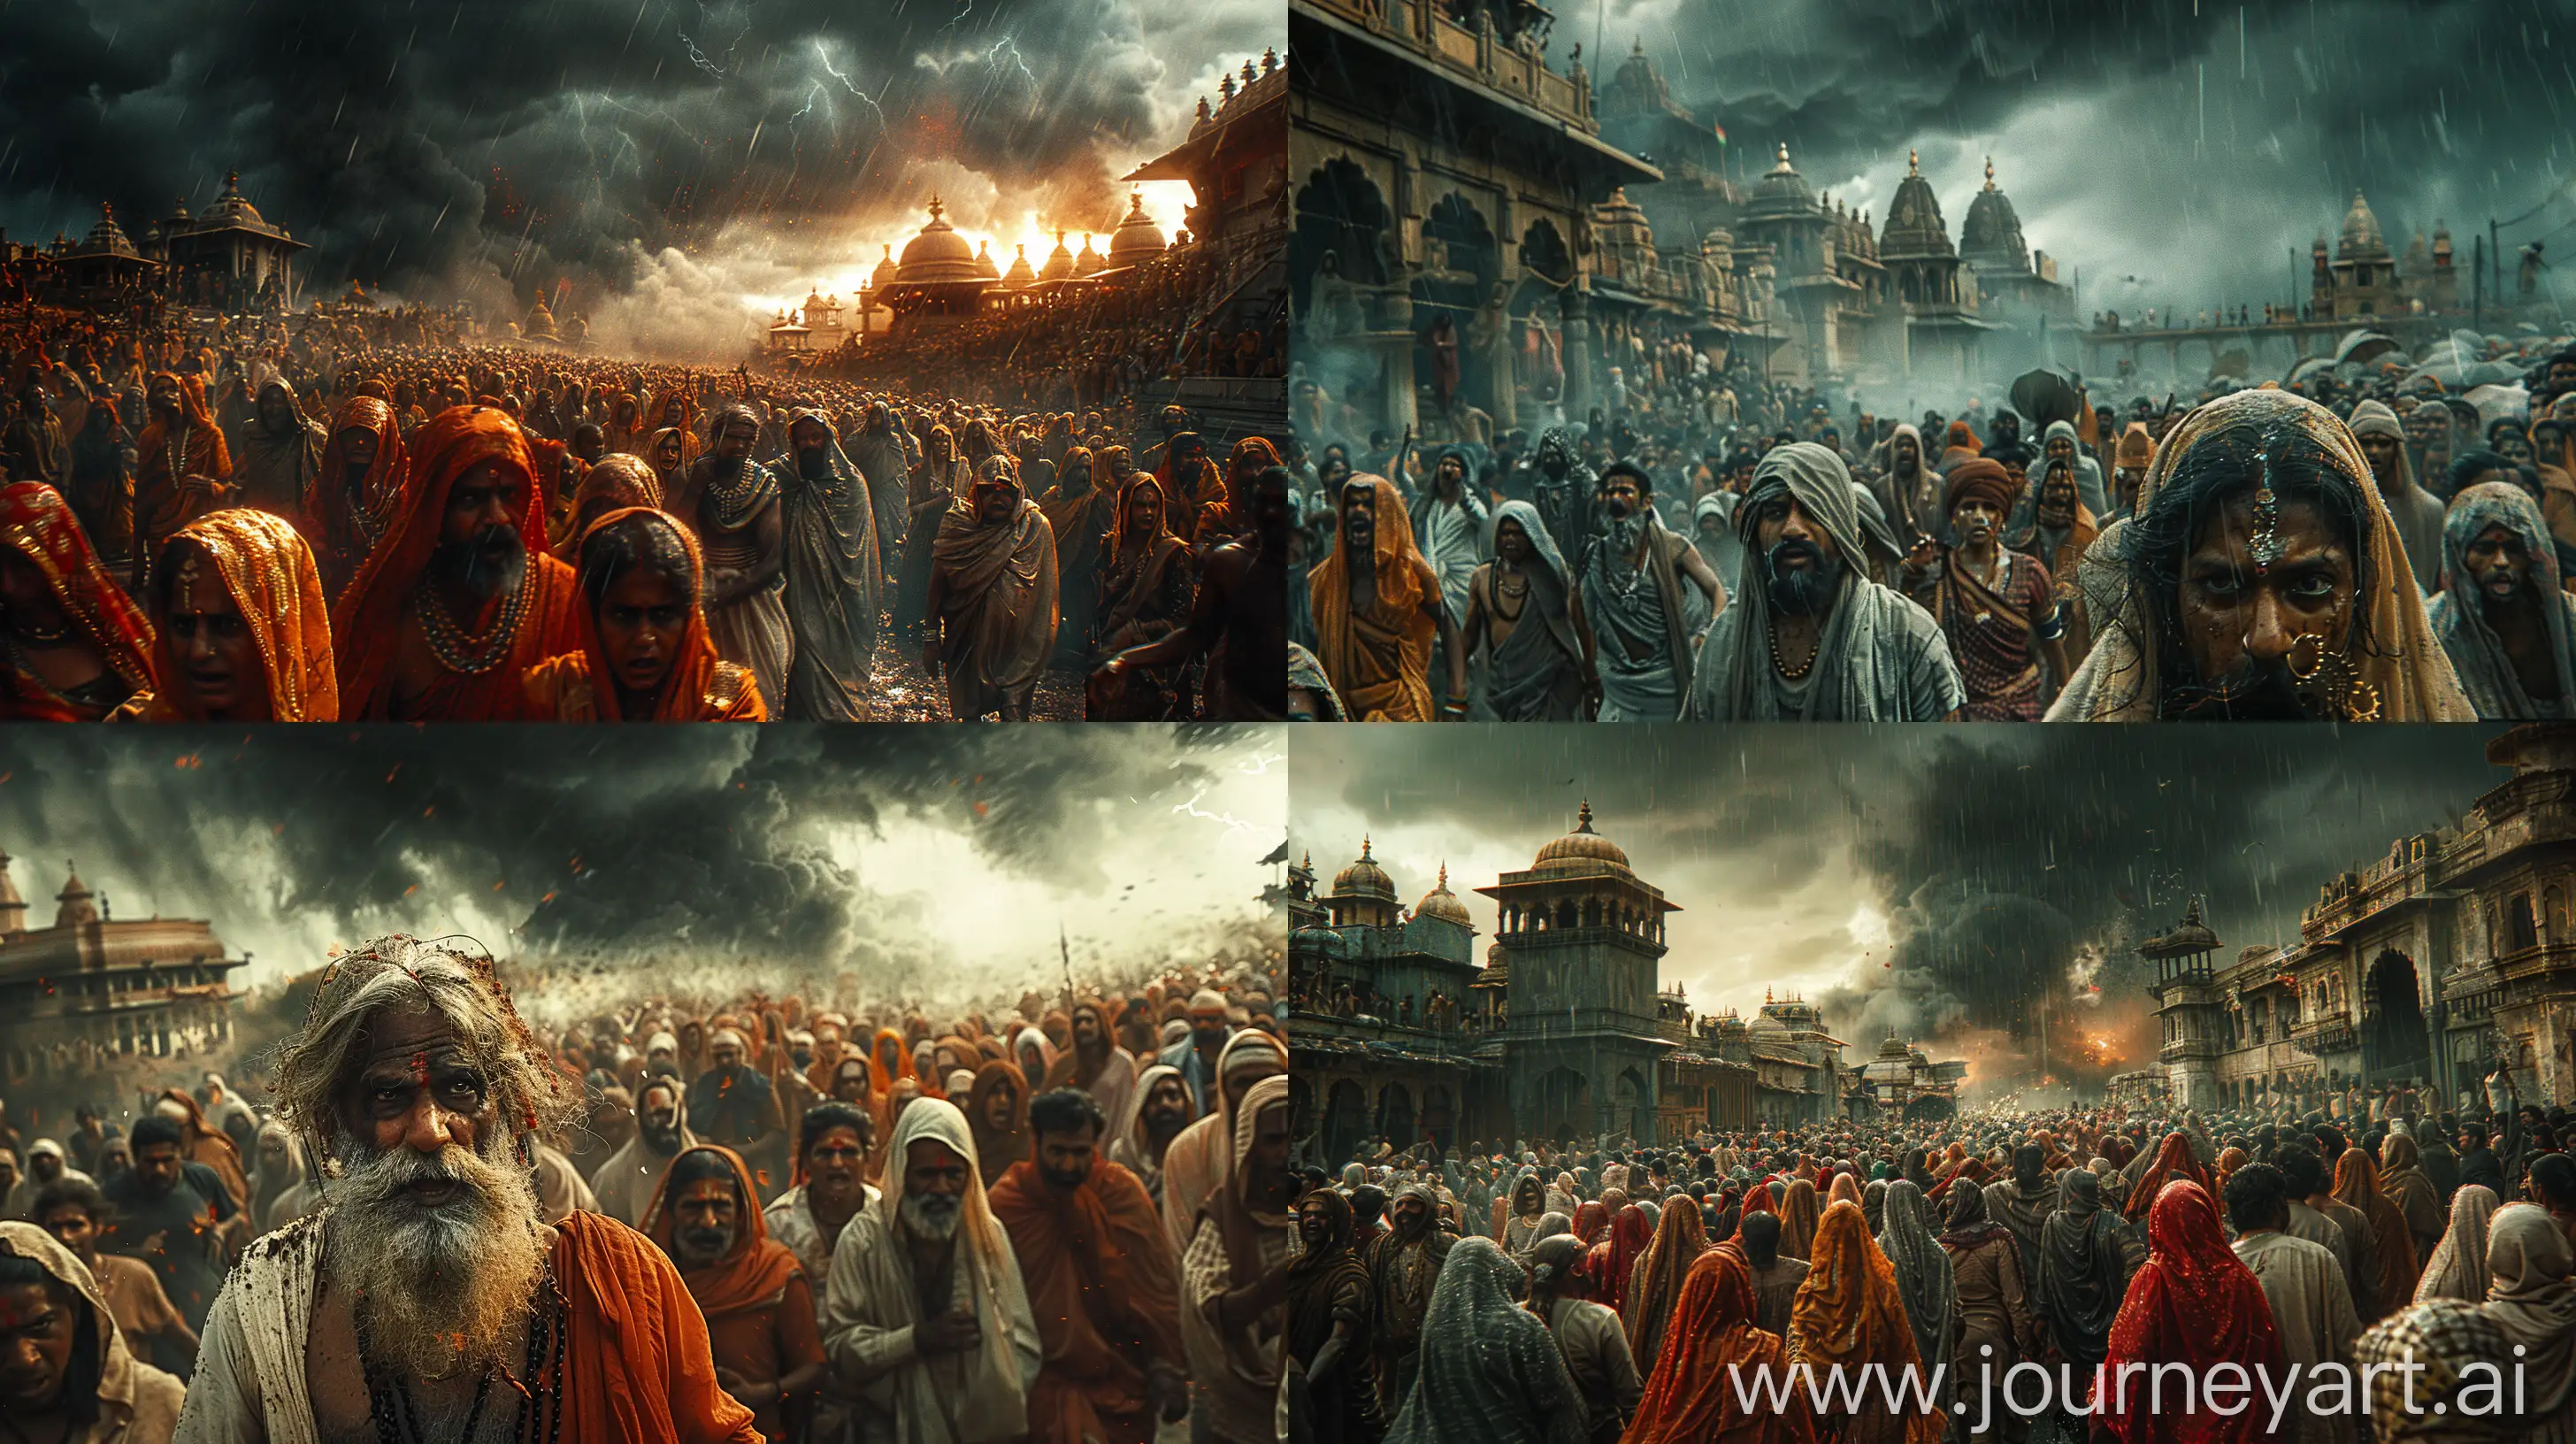 Terrified-Ancient-Indian-Crowd-Fleeing-in-Apocalyptic-Cinematic-Scene